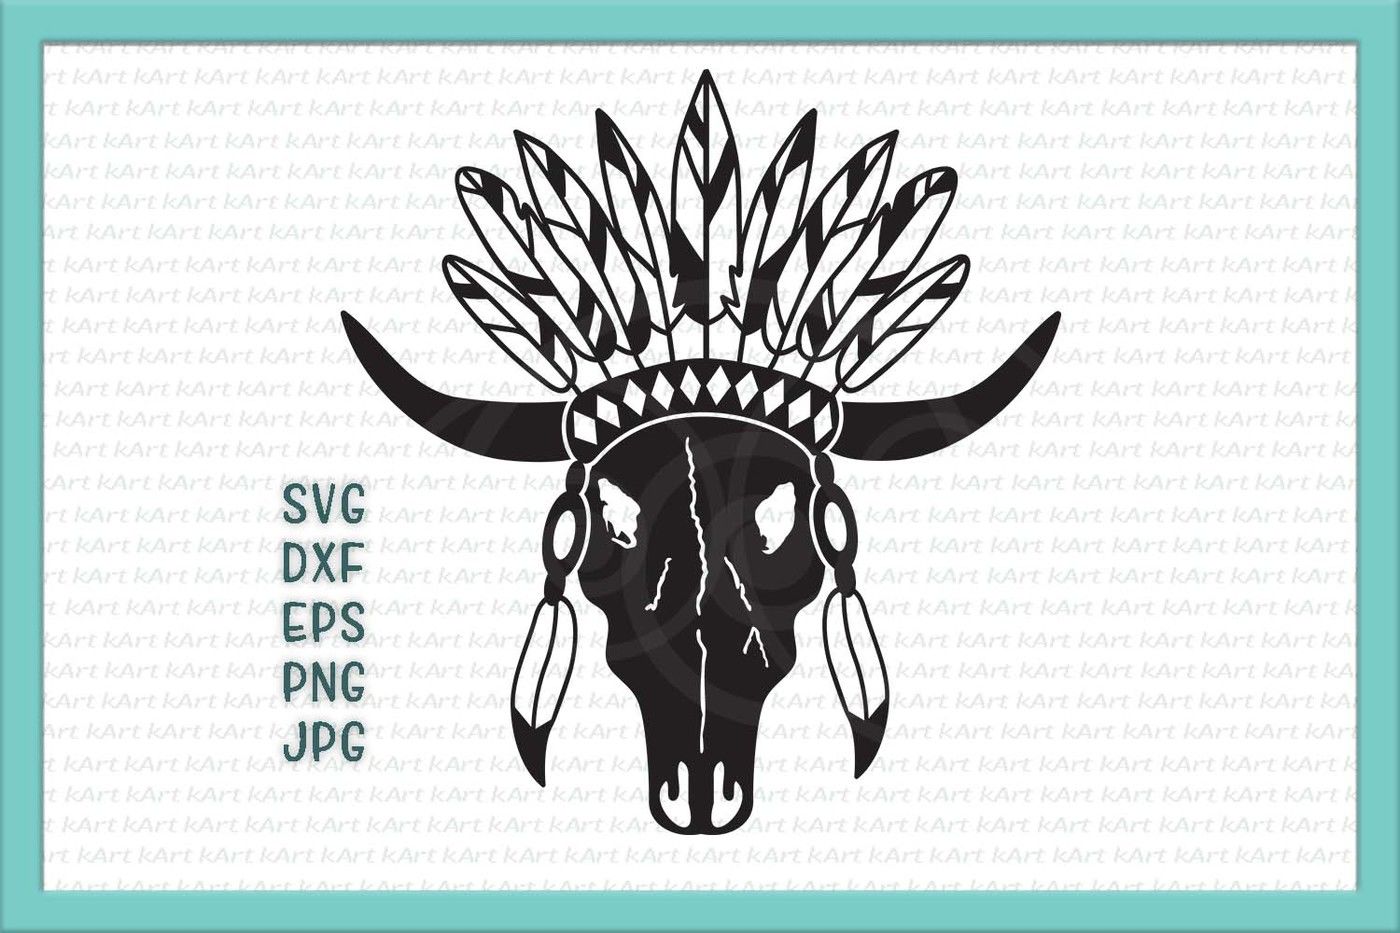 Download Cow Skull Svg Cow Skul Iron On Bull Skull Svg Feathers Tribal Svg Western Svg Texas Cower Silhouette Clipart Decal Design Country By Kartcreation Thehungryjpeg Com